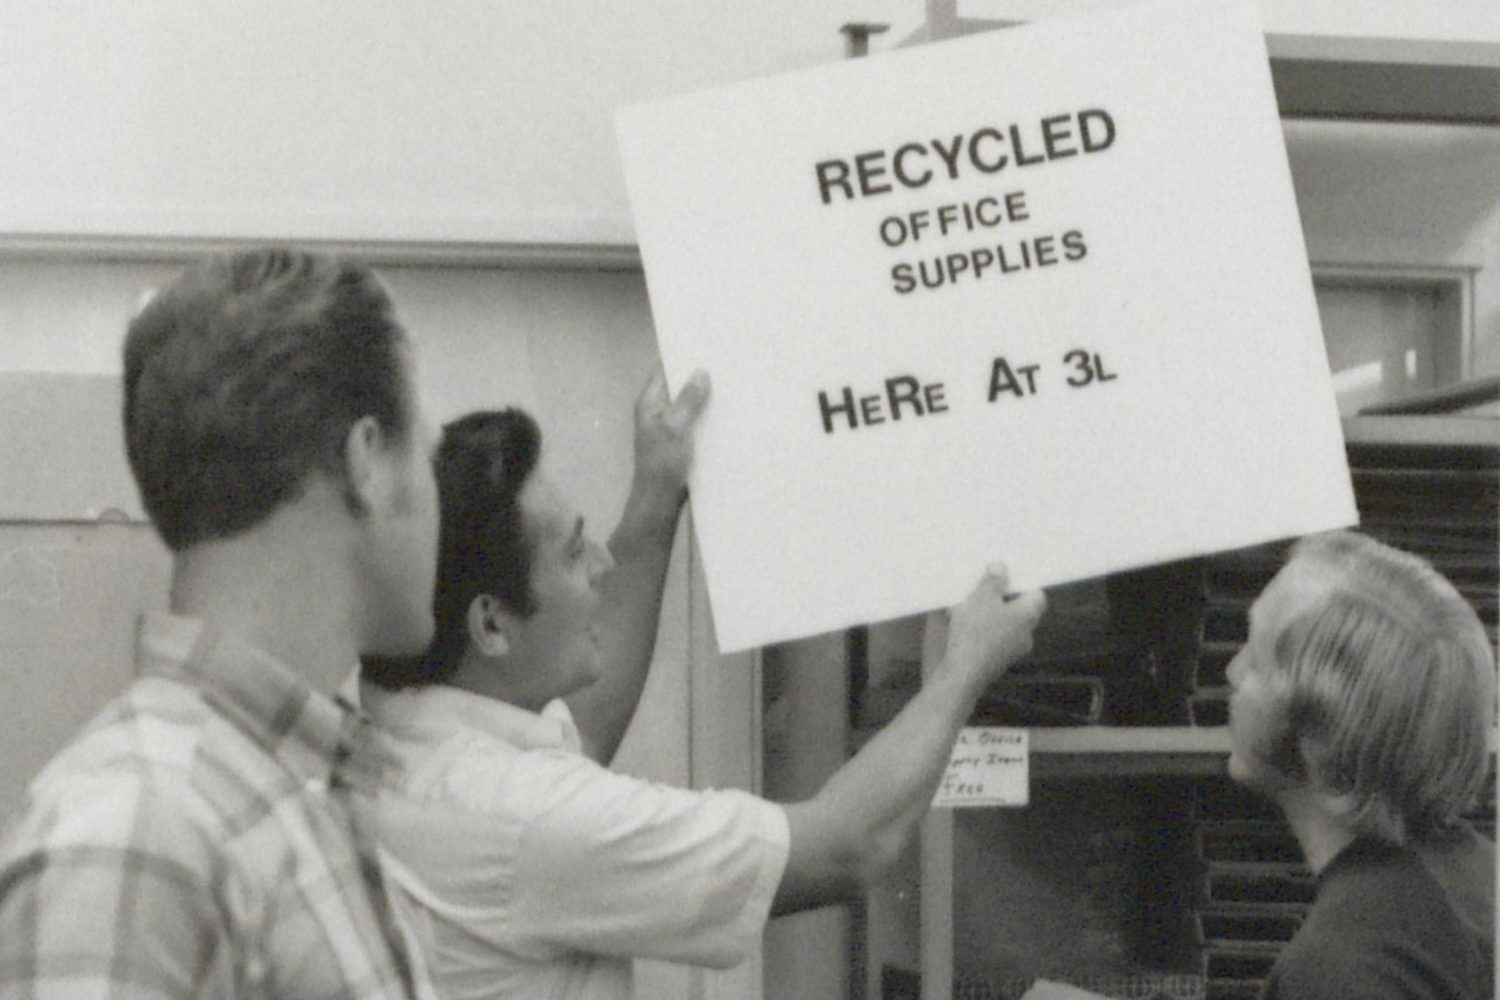 A photo of recycling efforts at HP in 1971. A man holds a sign that reads Recycled Office Supplies Here at 3L.